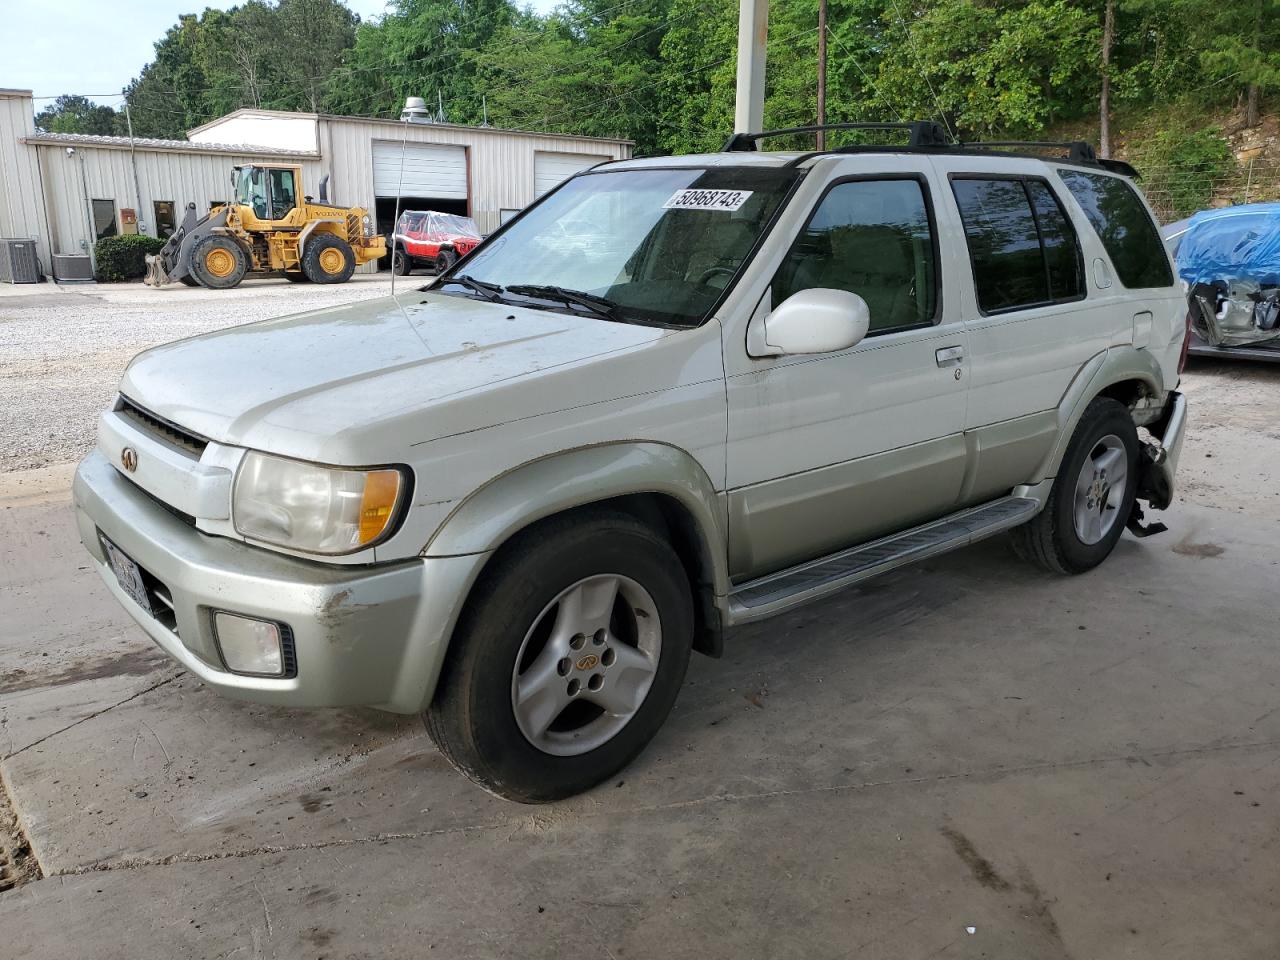 JNRDR09X13W****** Salvage and Wrecked 2003 Infiniti QX4 in AL - Hueytown